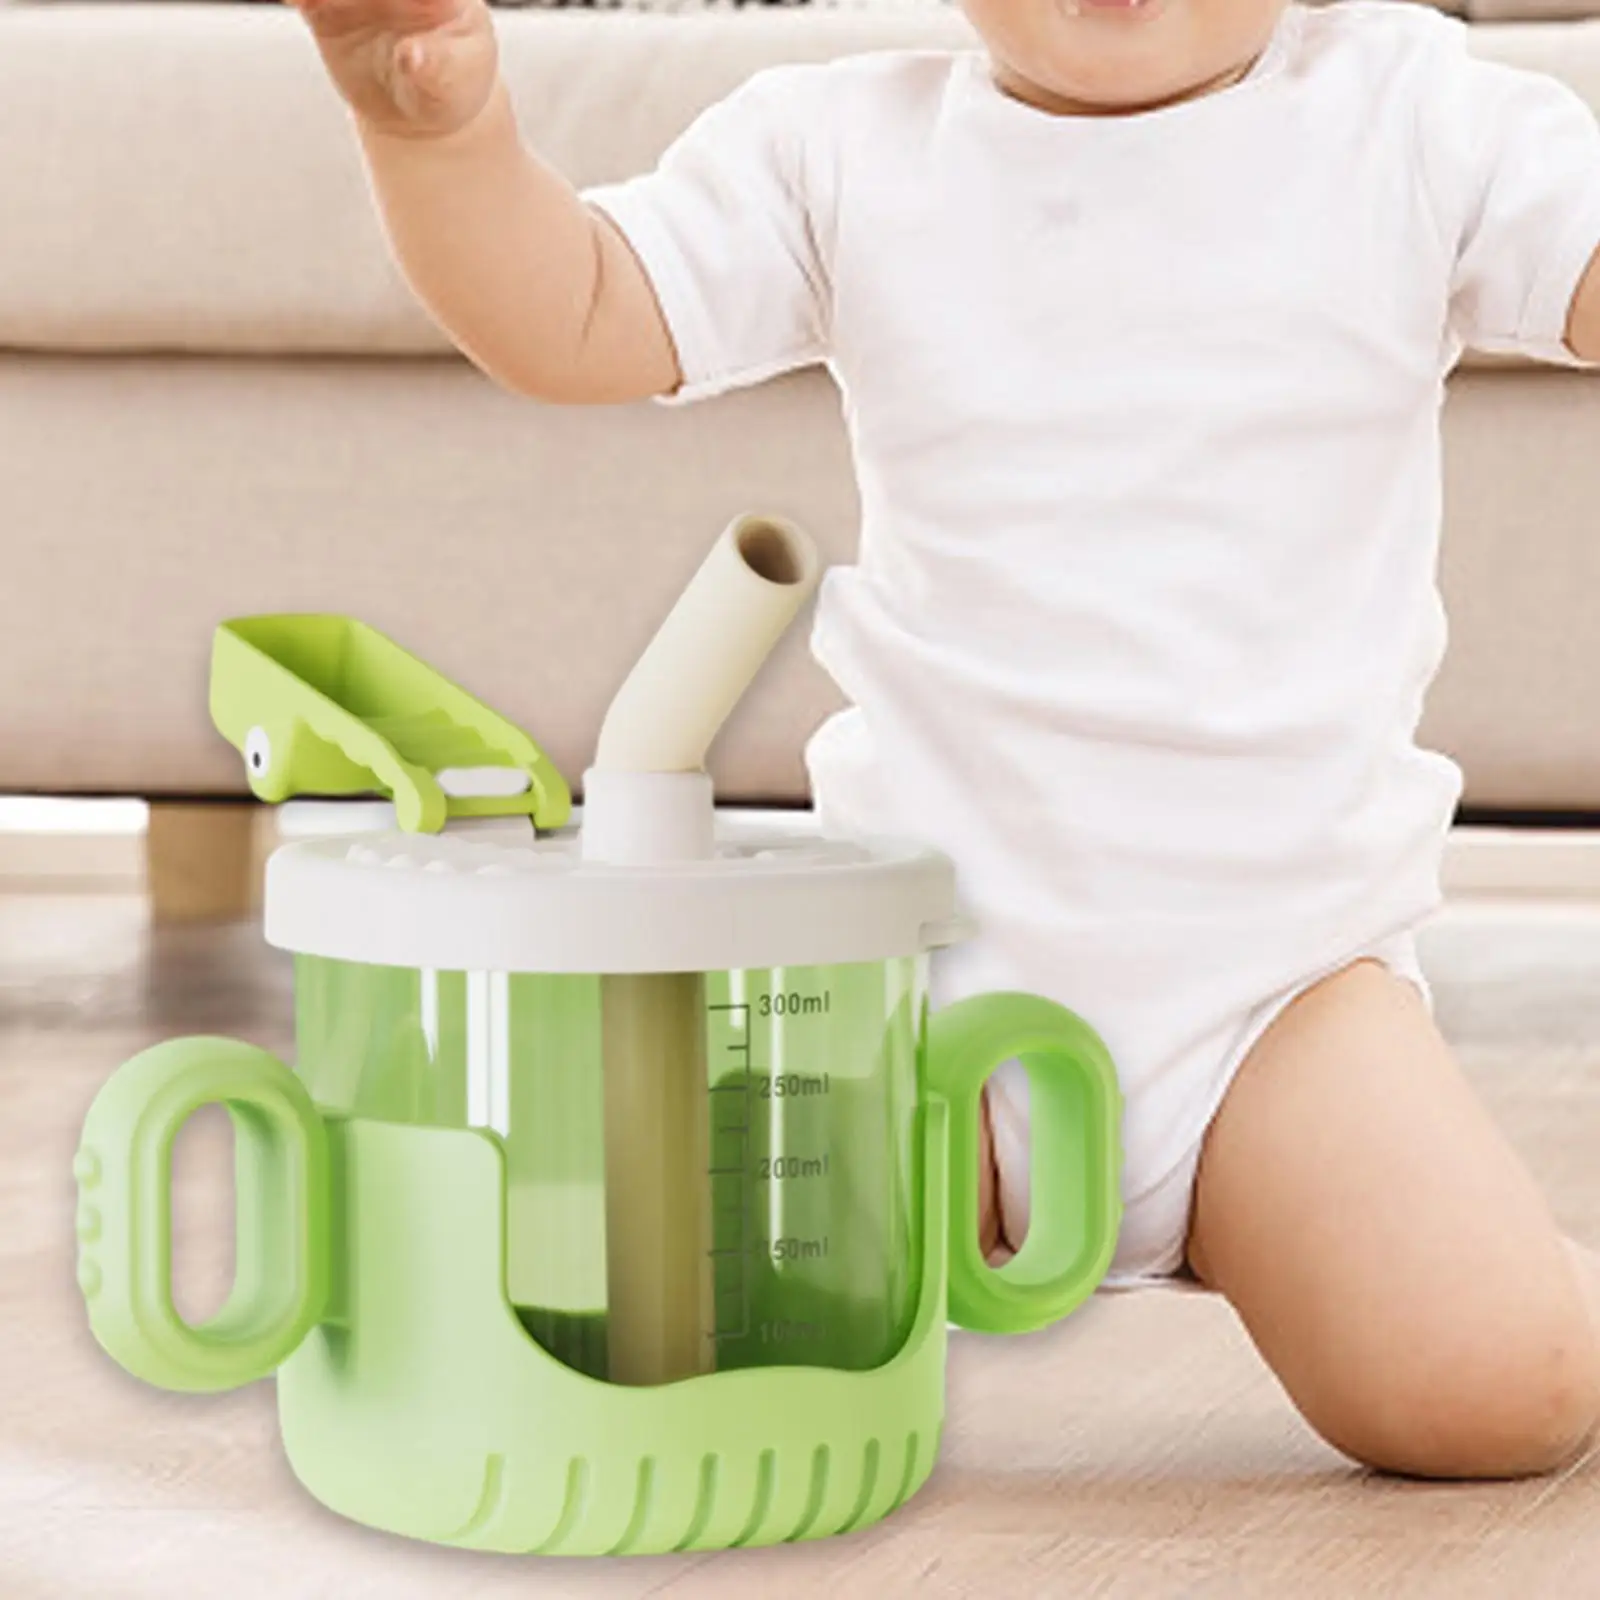 Sippy Cups 10Oz/300ml Unbreakable Leakproof Training Cup with Straw with Scale for Baby Boys Girls Children